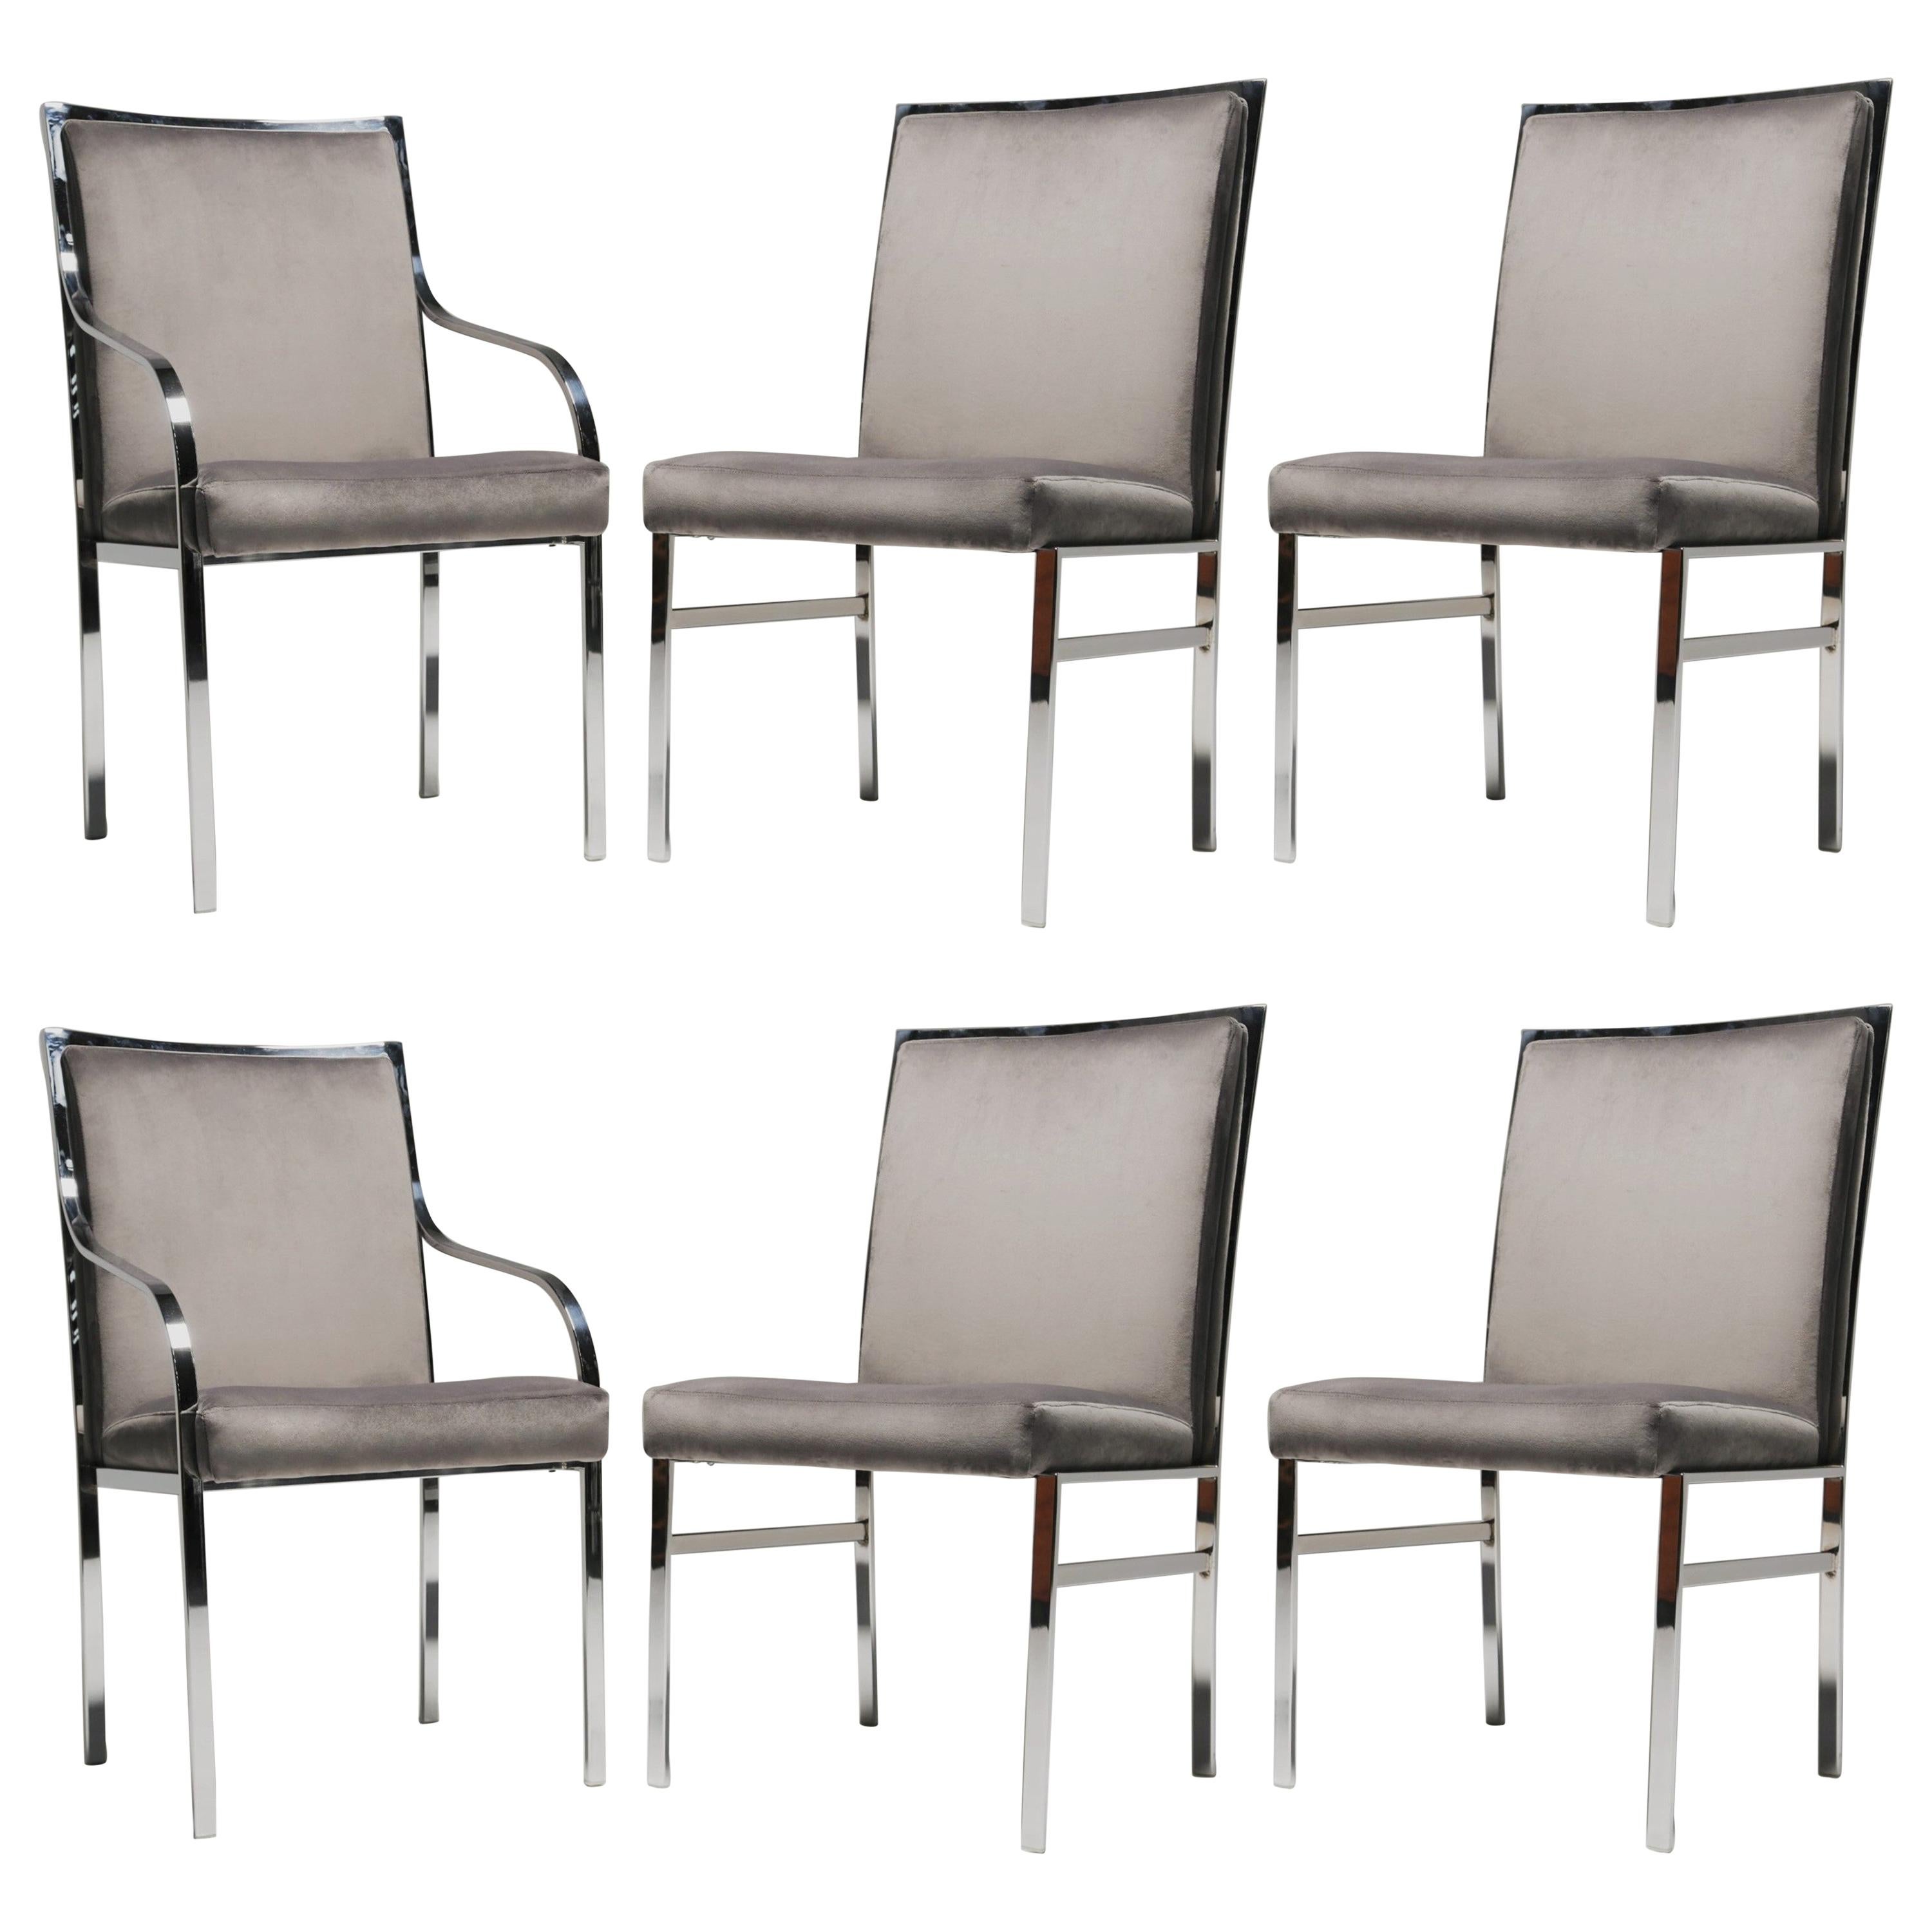 Gorgeous Set of Six Chrome and Beige Velvet Dining Chairs by Pierre Cardin